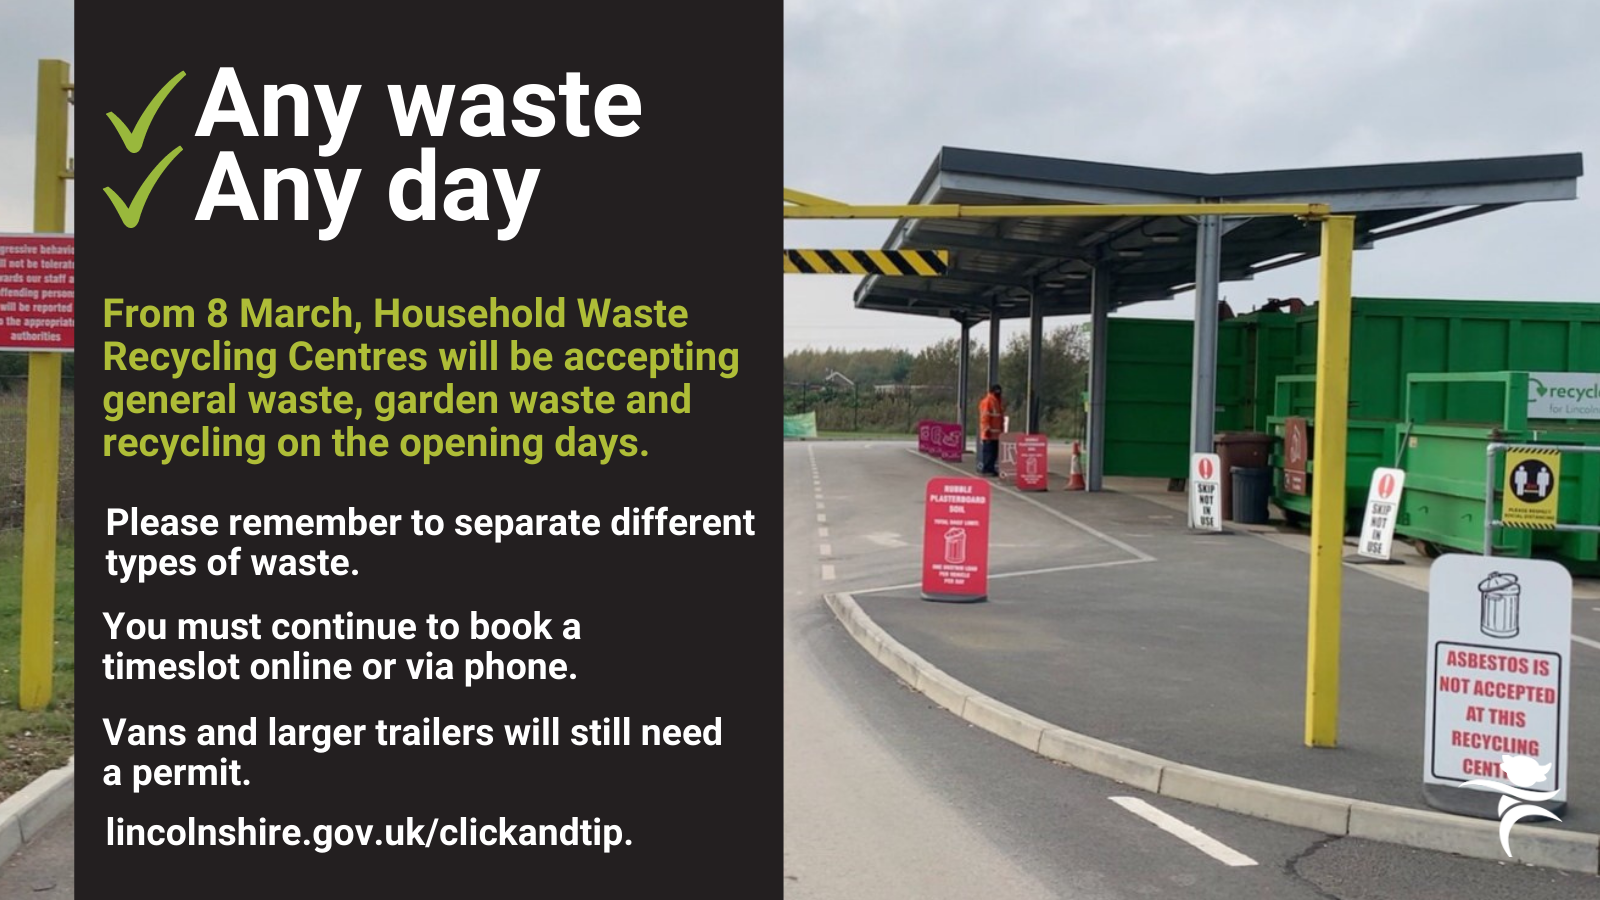 Household Waste Recycling Centres to accept all wastes on all days